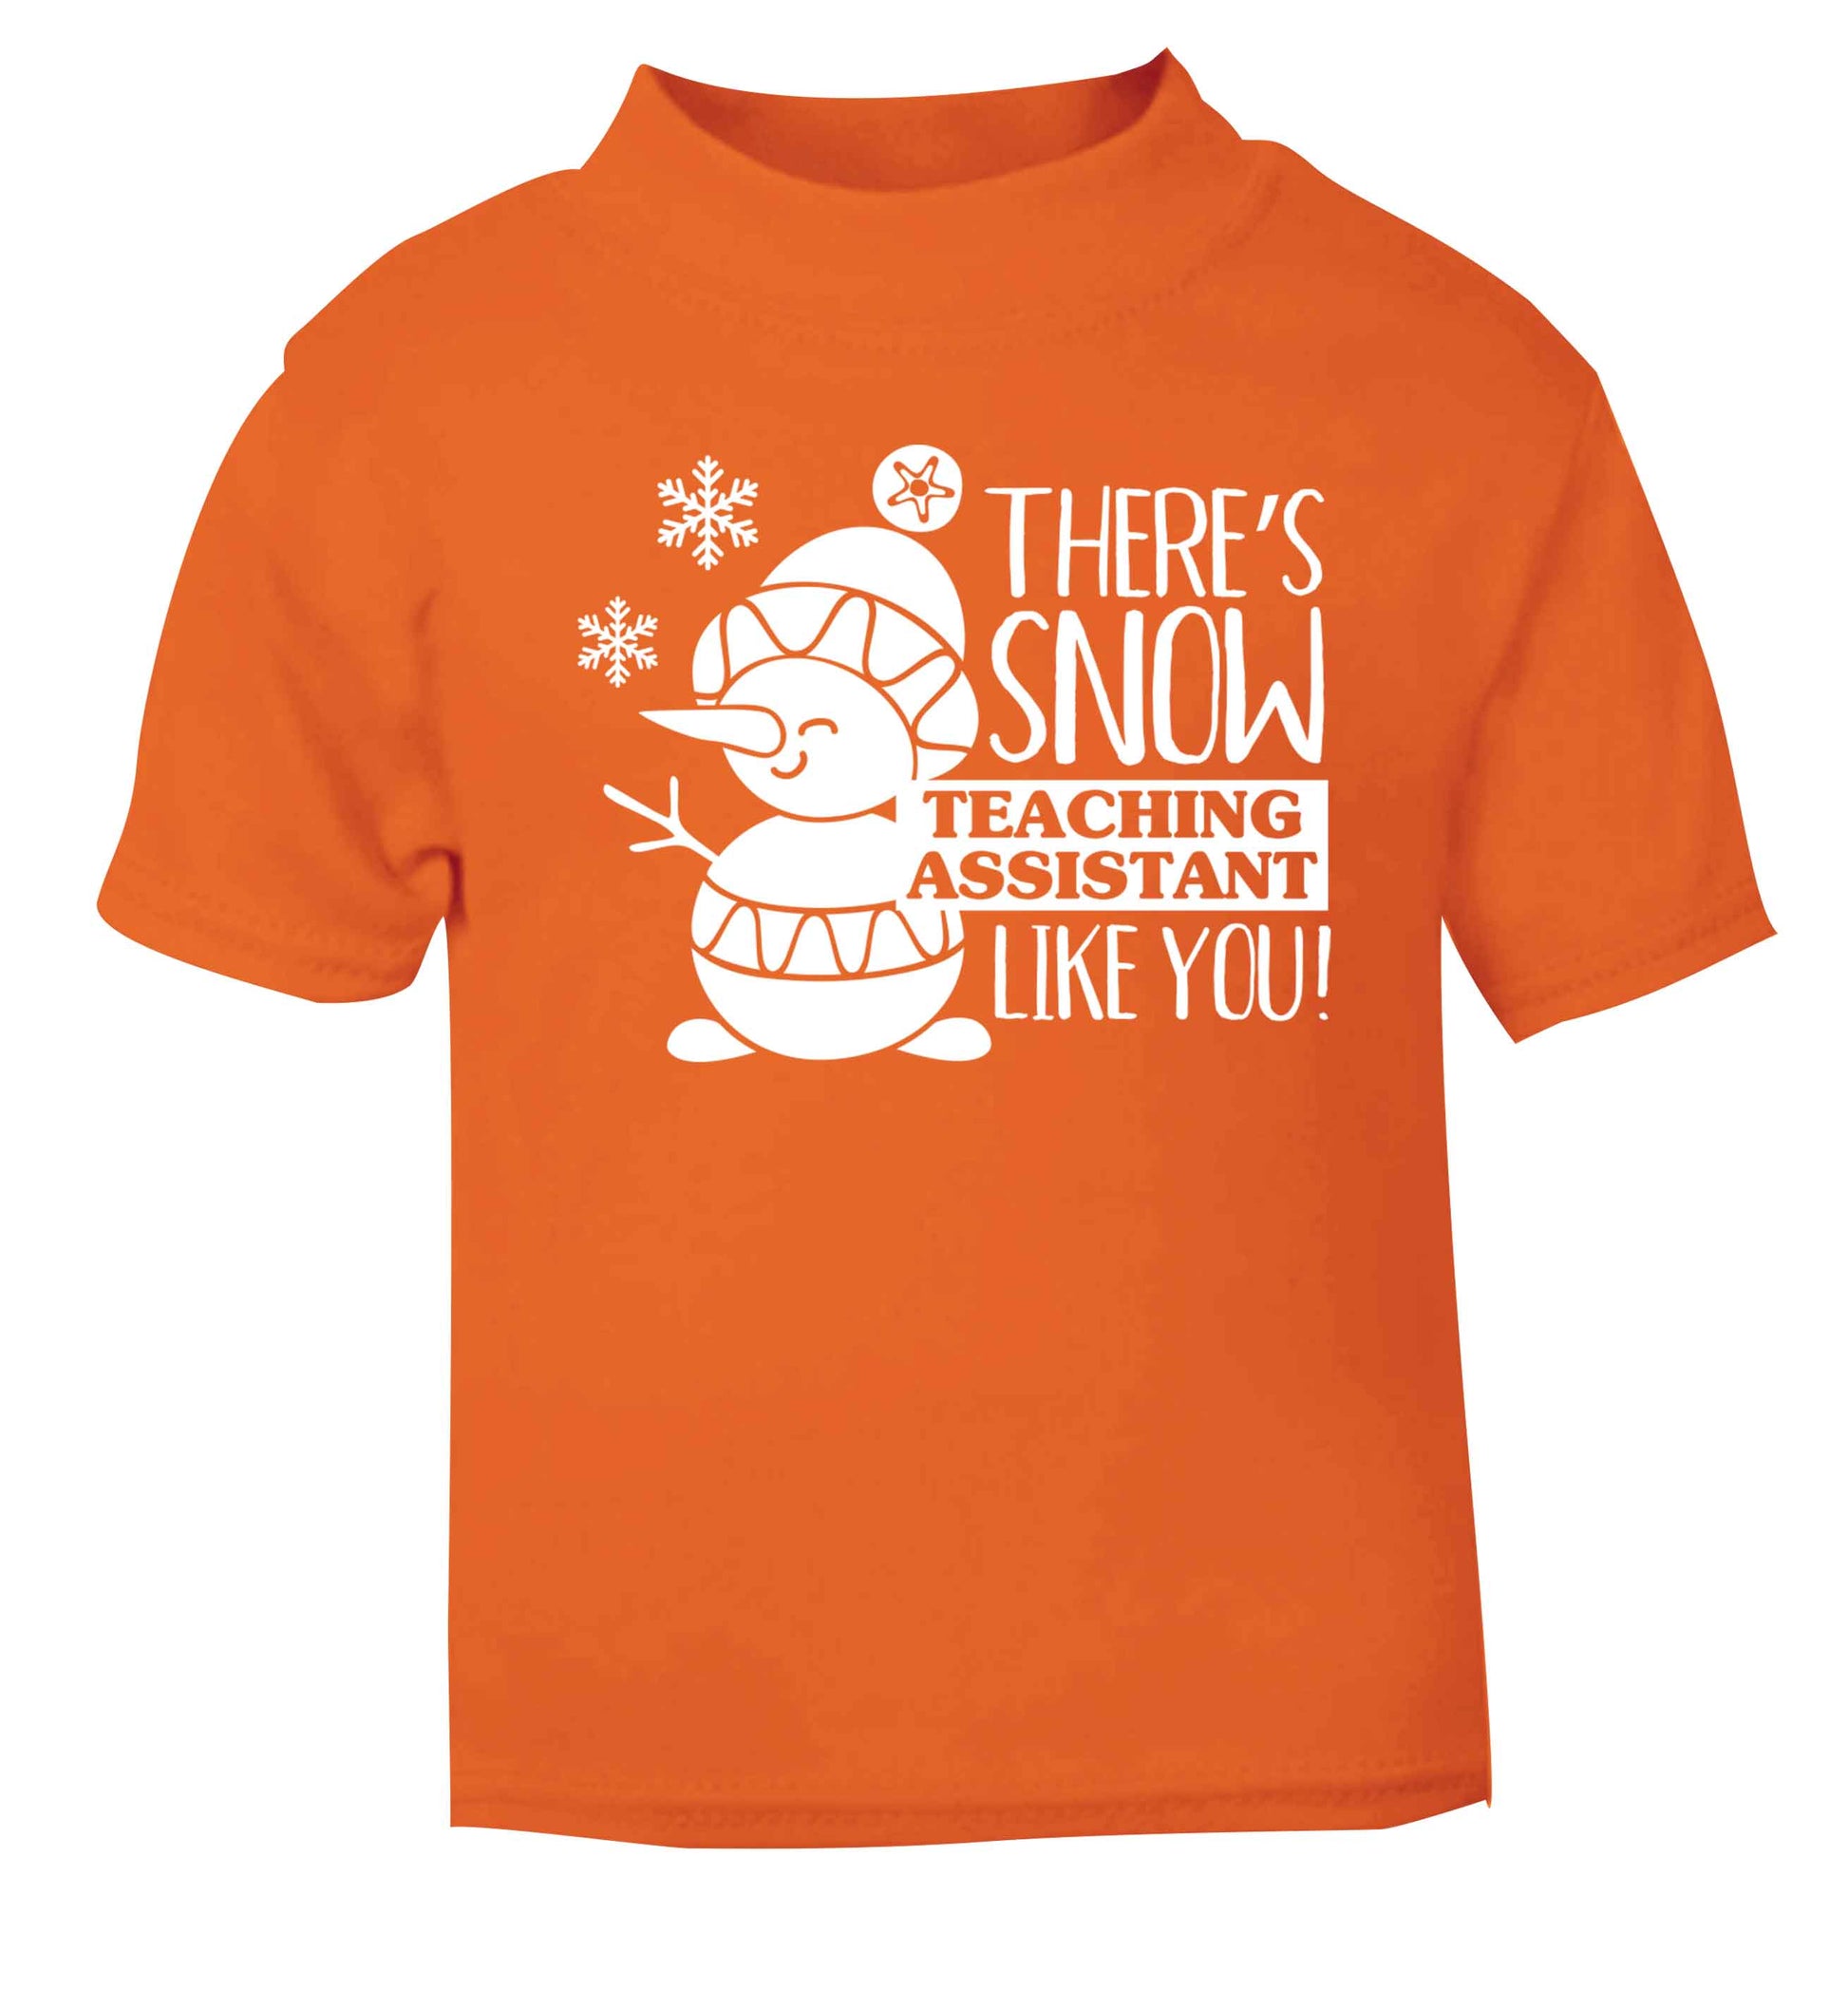 There's snow teaching assistant like you orange baby toddler Tshirt 2 Years